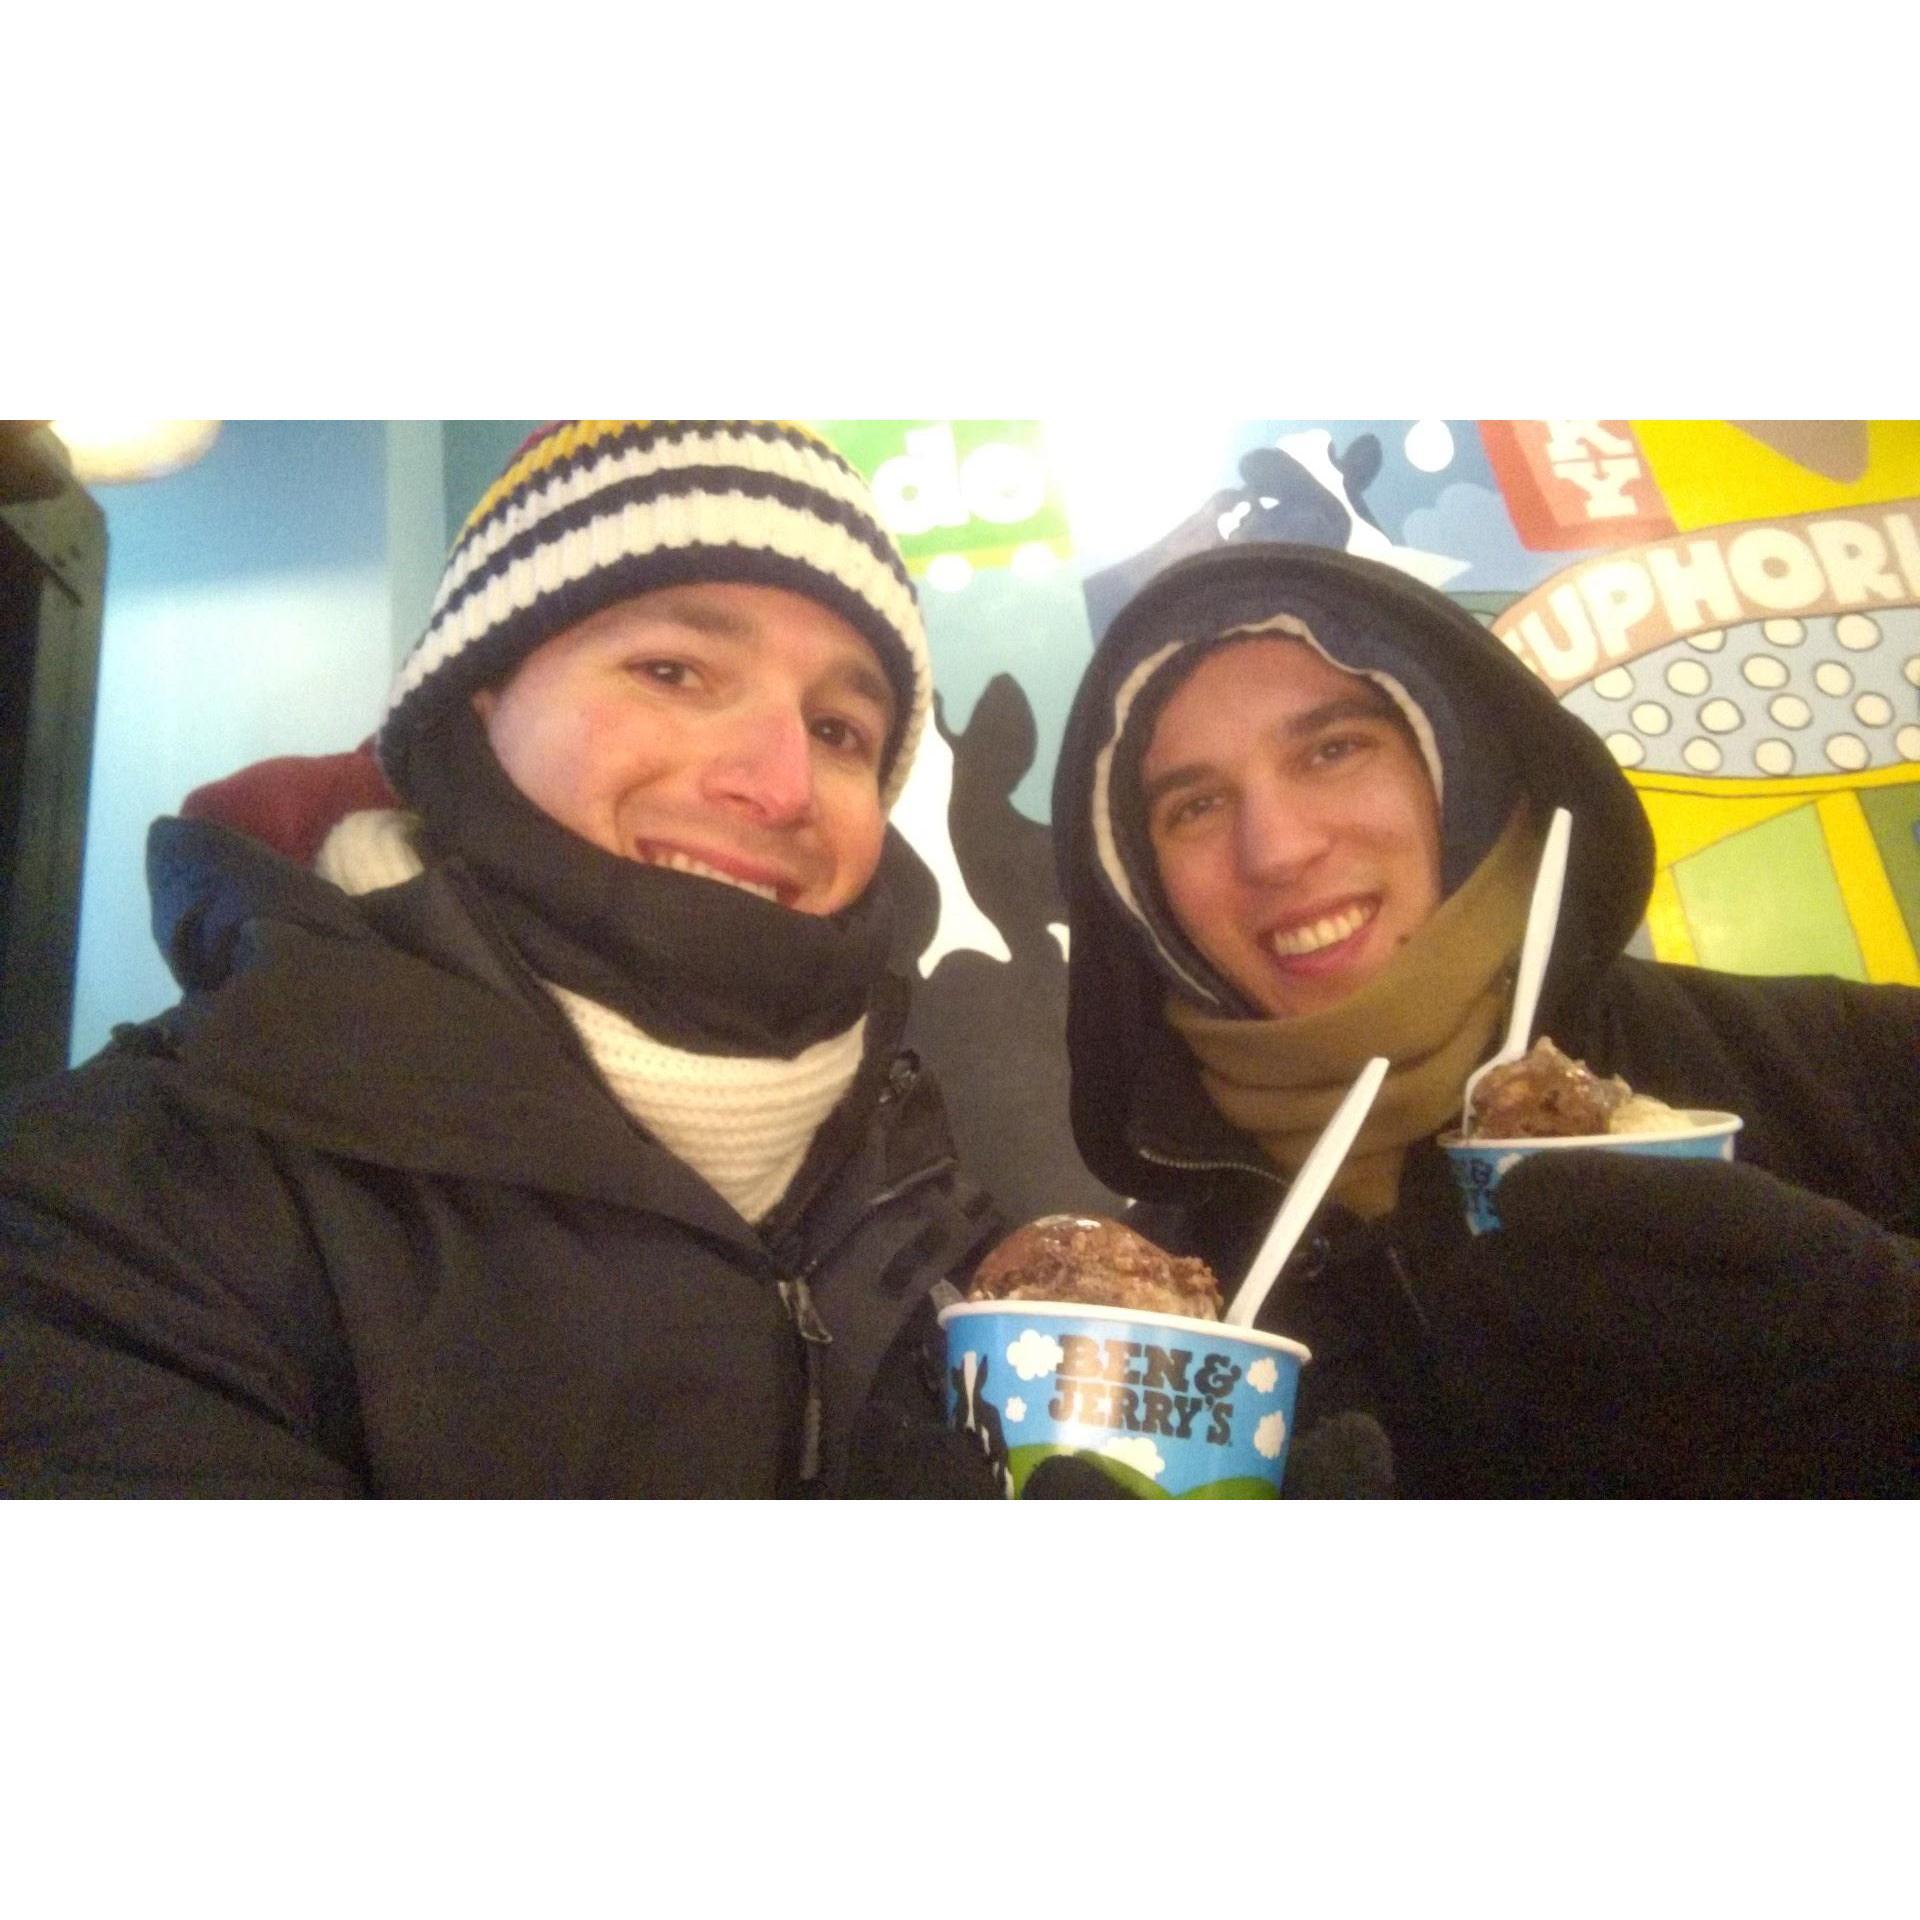 It's never too cold for ice cream!